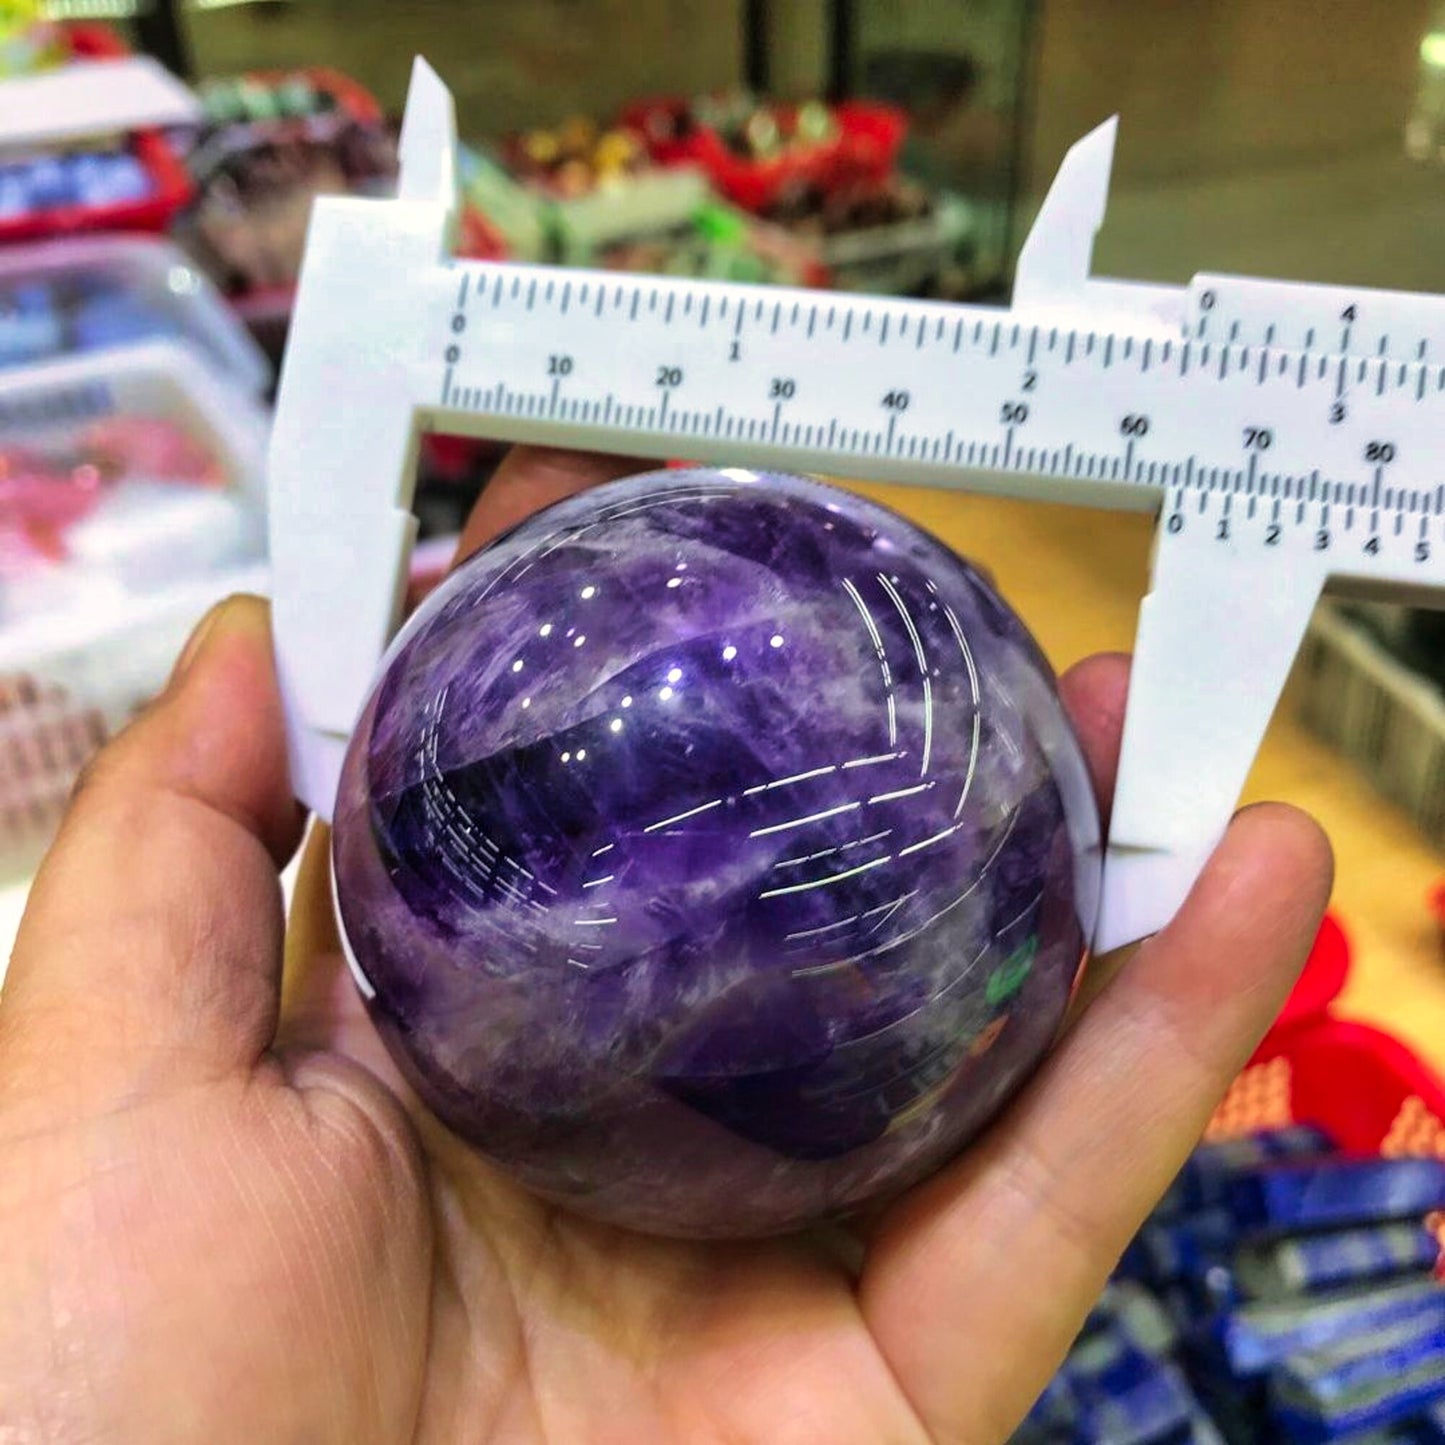 Natural Dream Amethyst Ball Polished Globe High Quality Crystal Home Decoration Exquisite Gift 1pcs 80mm